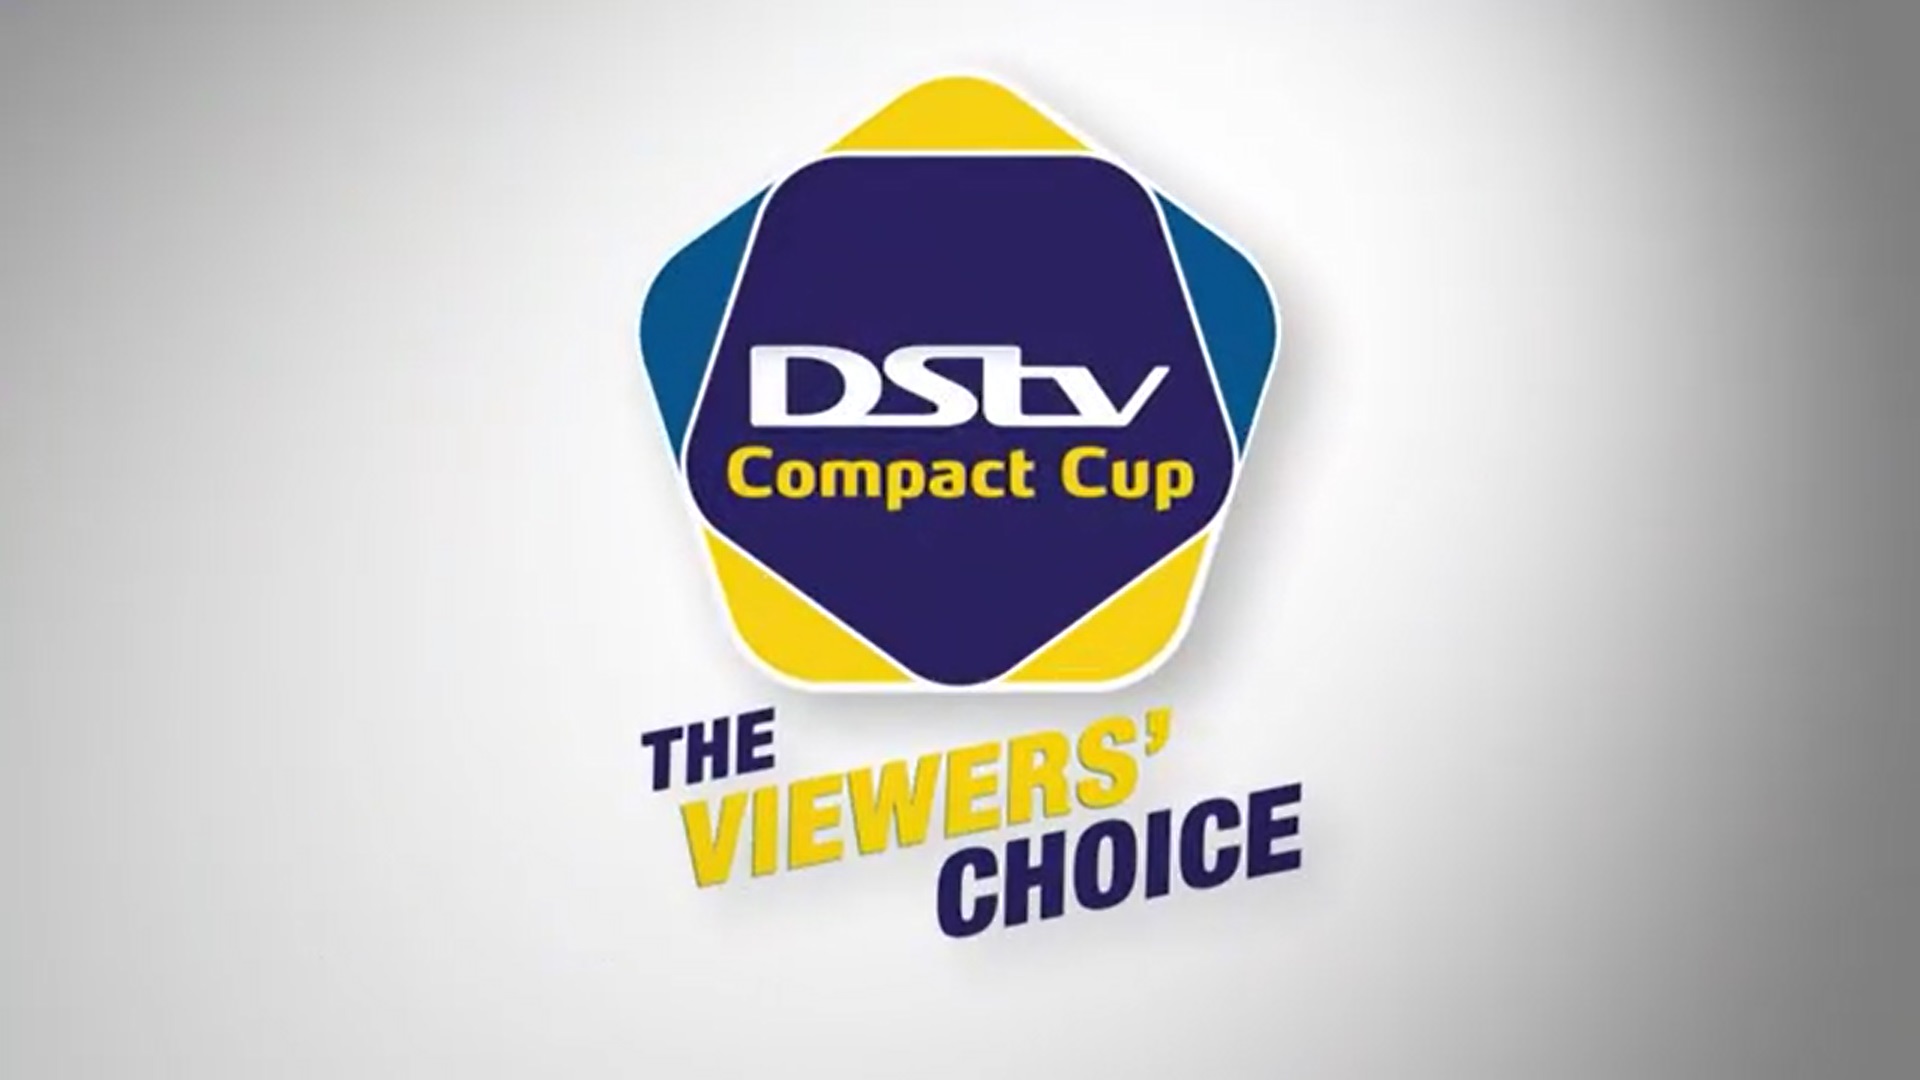 DStv Compact Cup | Promo